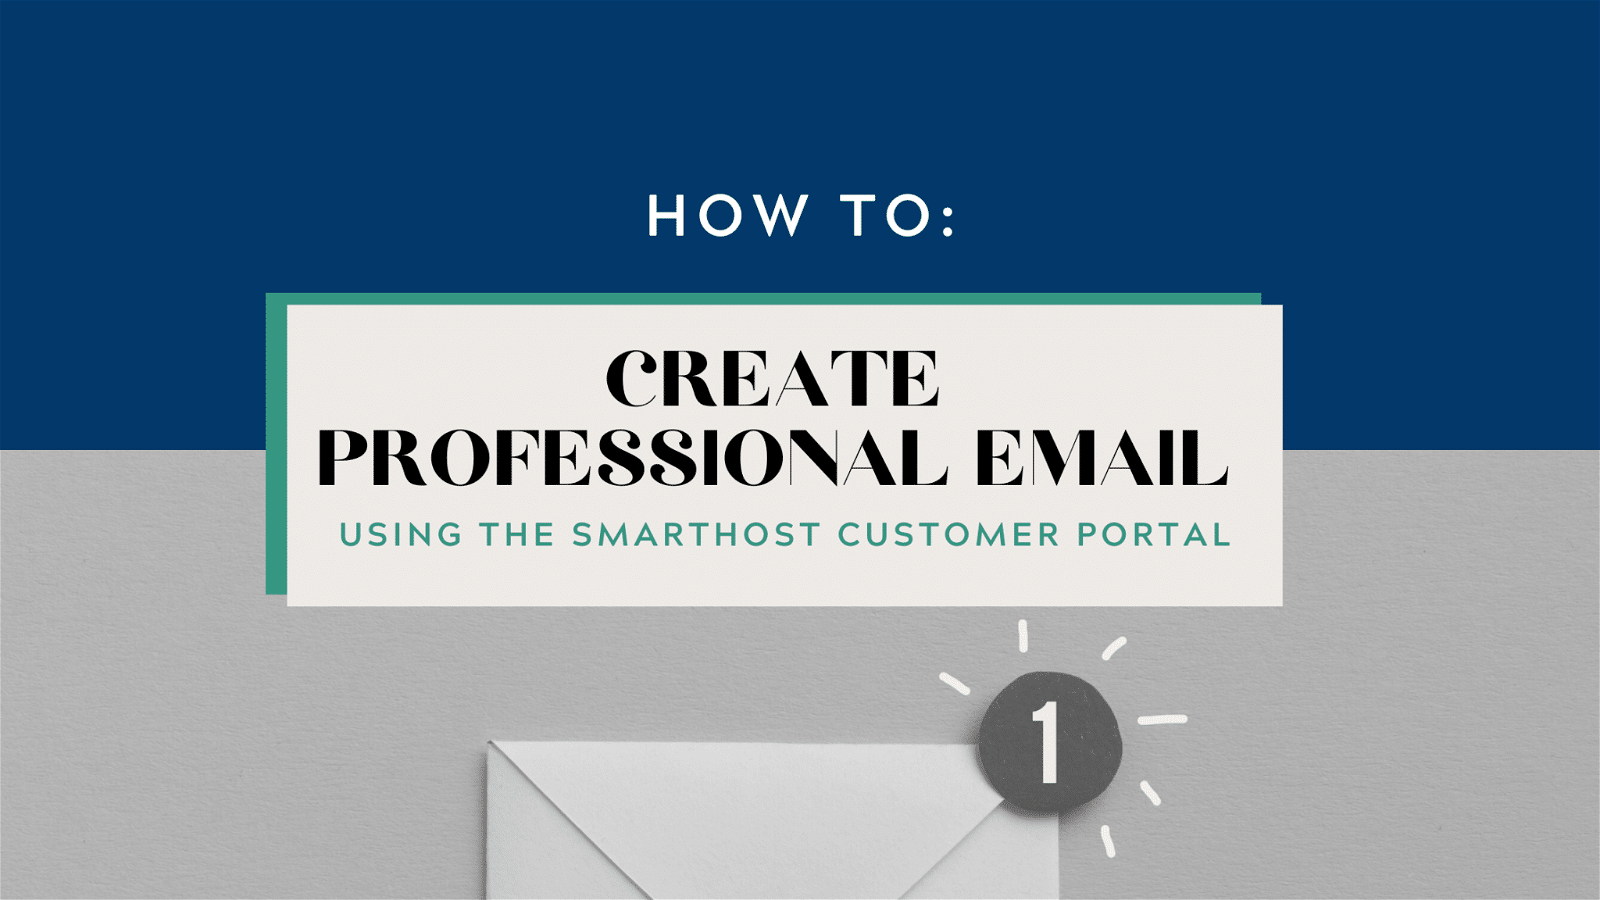 This image is demonstrating how to create a professional email using the Smarthost customer portal.